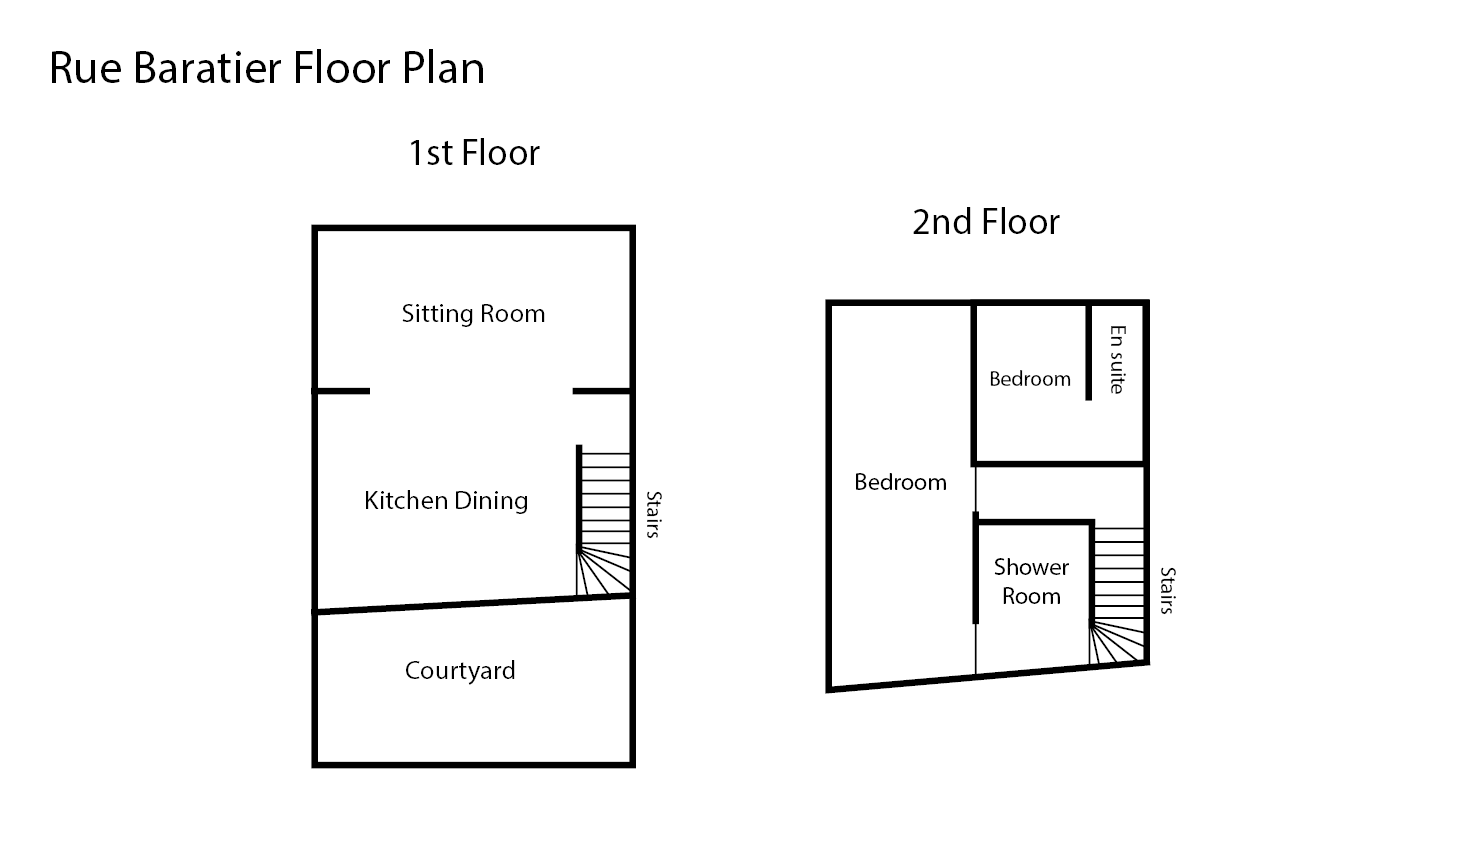 Click on Rue Baratier floor plan to view images